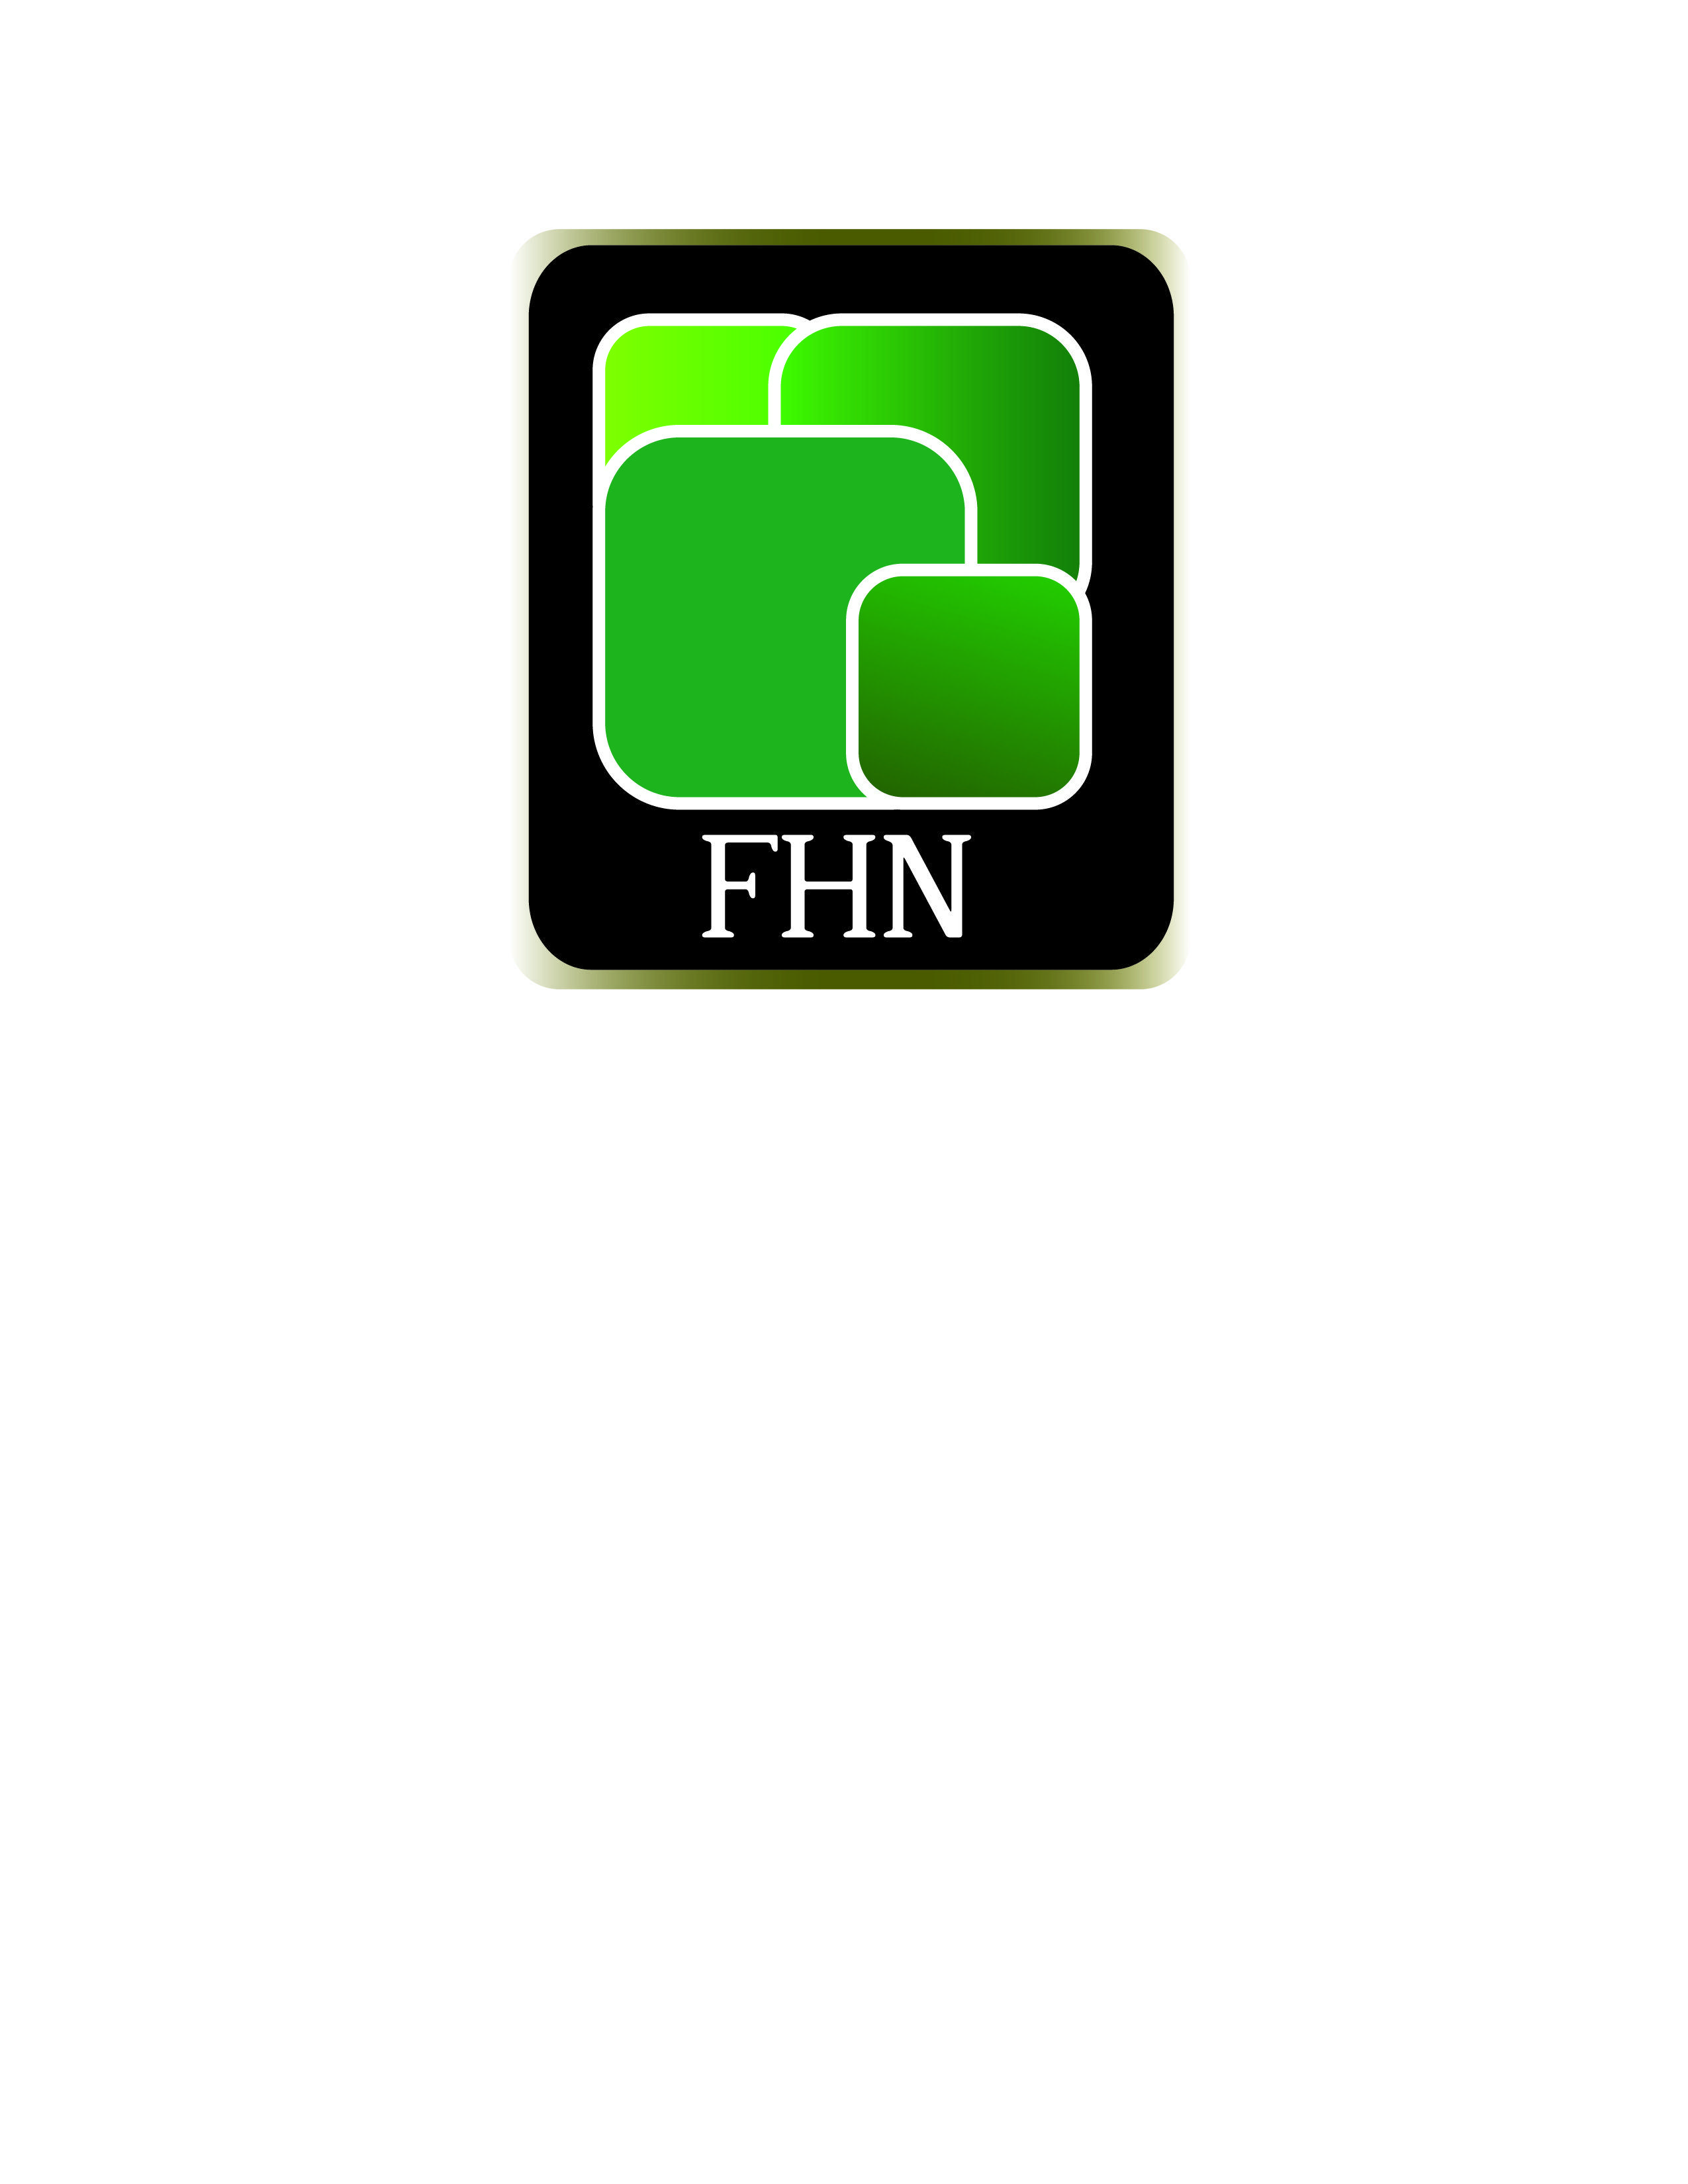 Fhn Logo - Logo Submission for 'FHN' Contest | Design #8904992